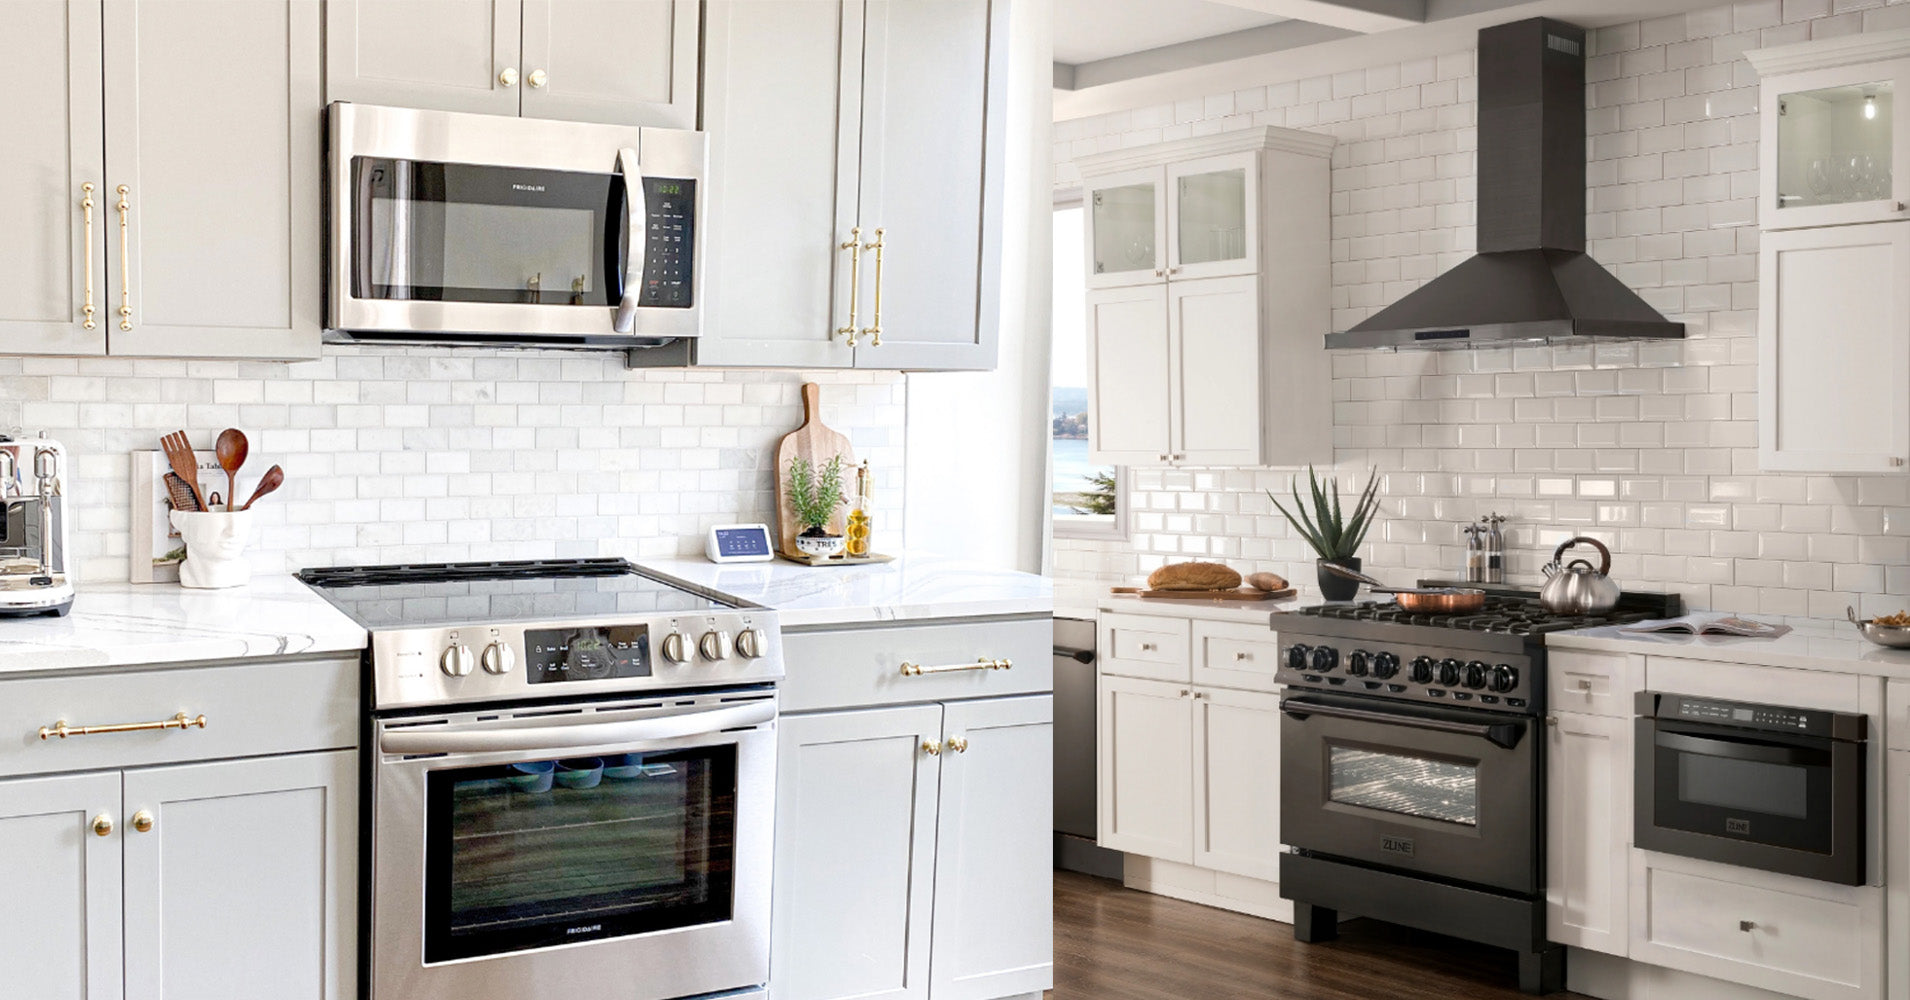 Which one should I buy? OTR Microwaves With Exhaust Fans vs. Range Hoods